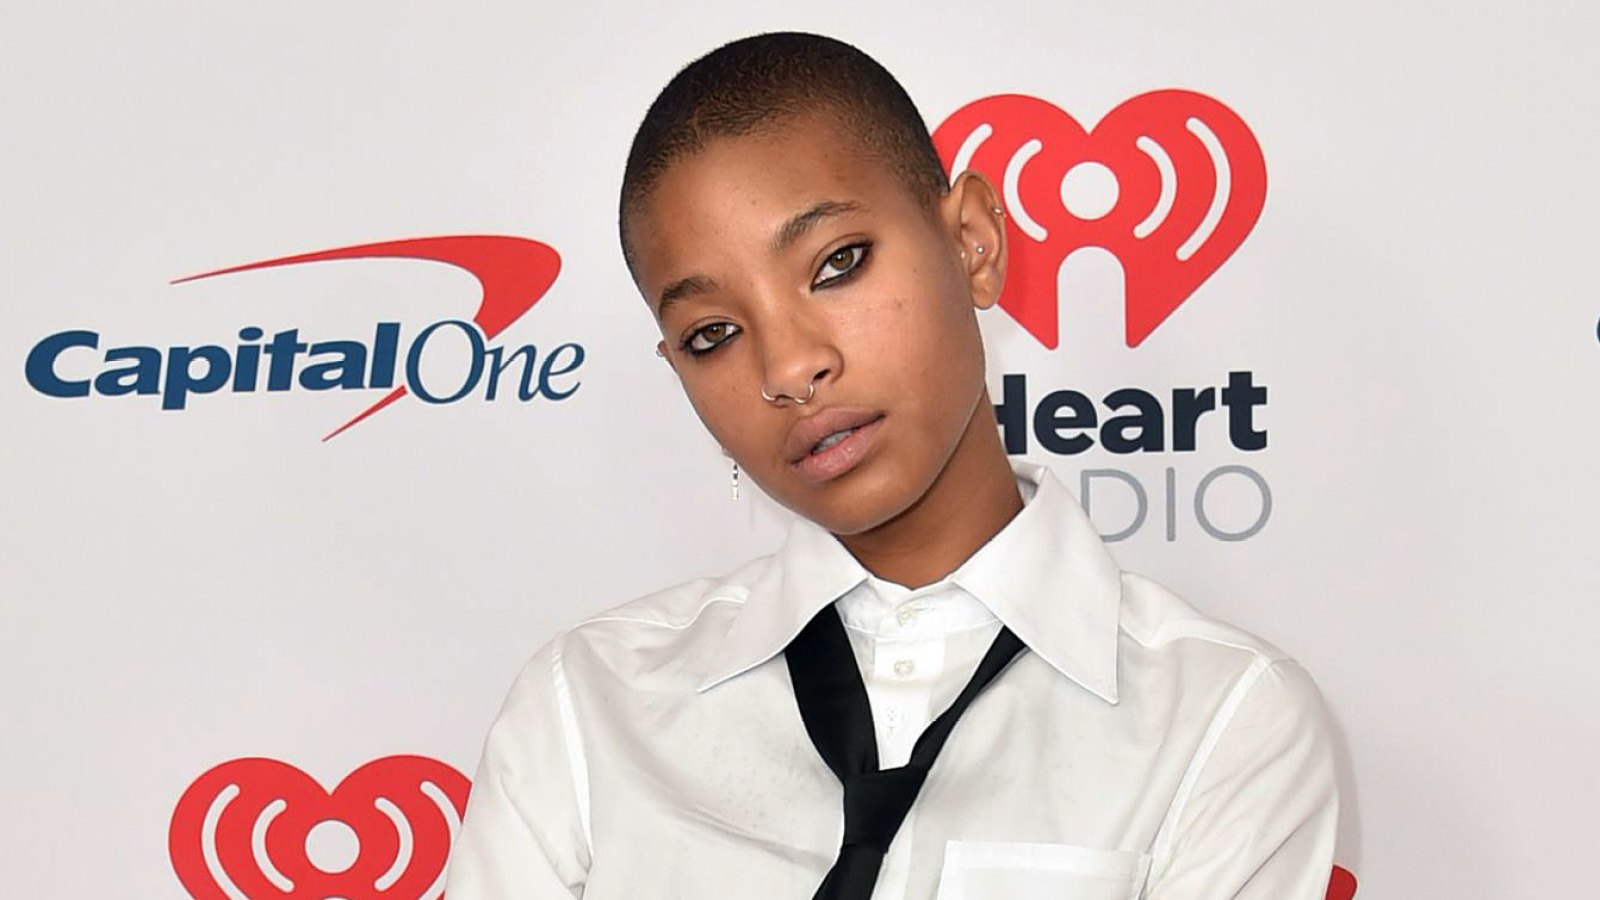 Willow Smiths Massive New Tattoo Is the Start of Her Sleeve